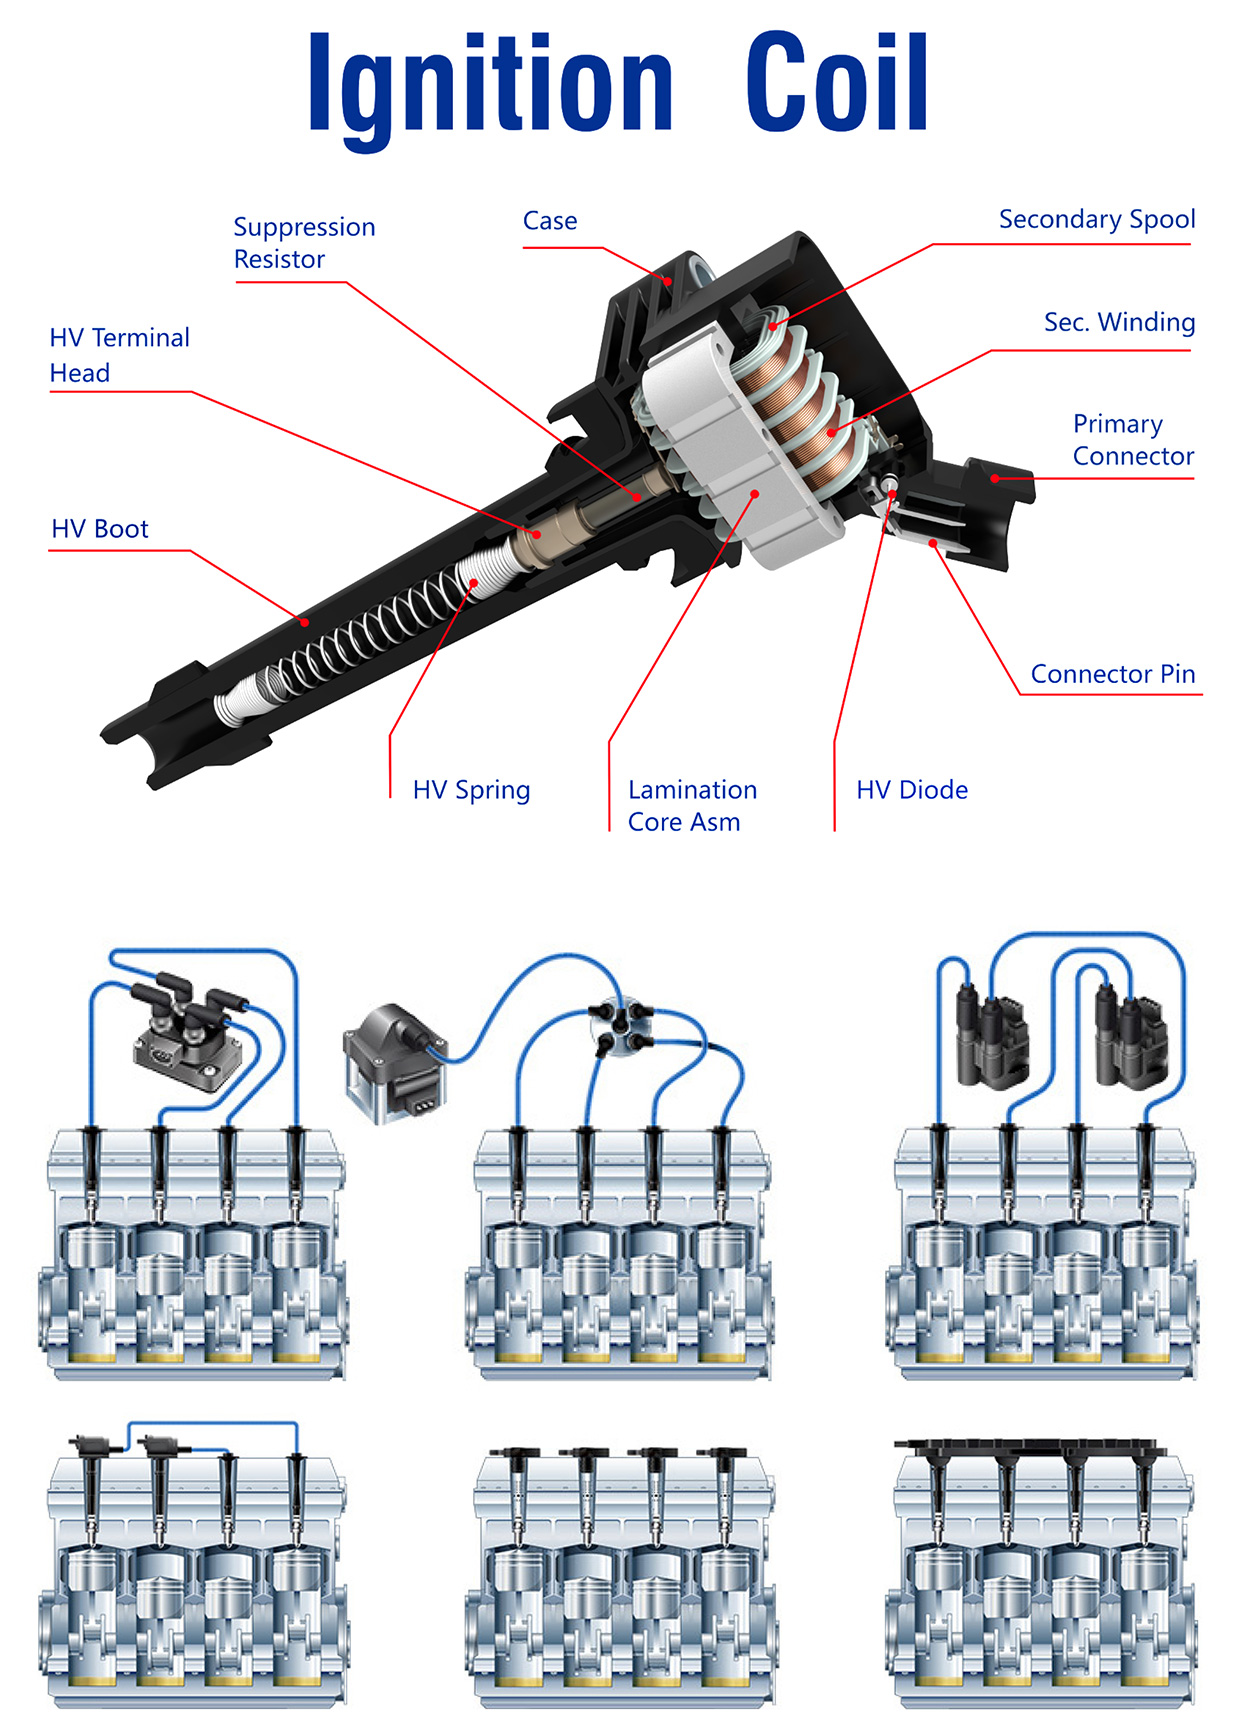 Ignition Coil Technical Documents - Swan Ignition Coils